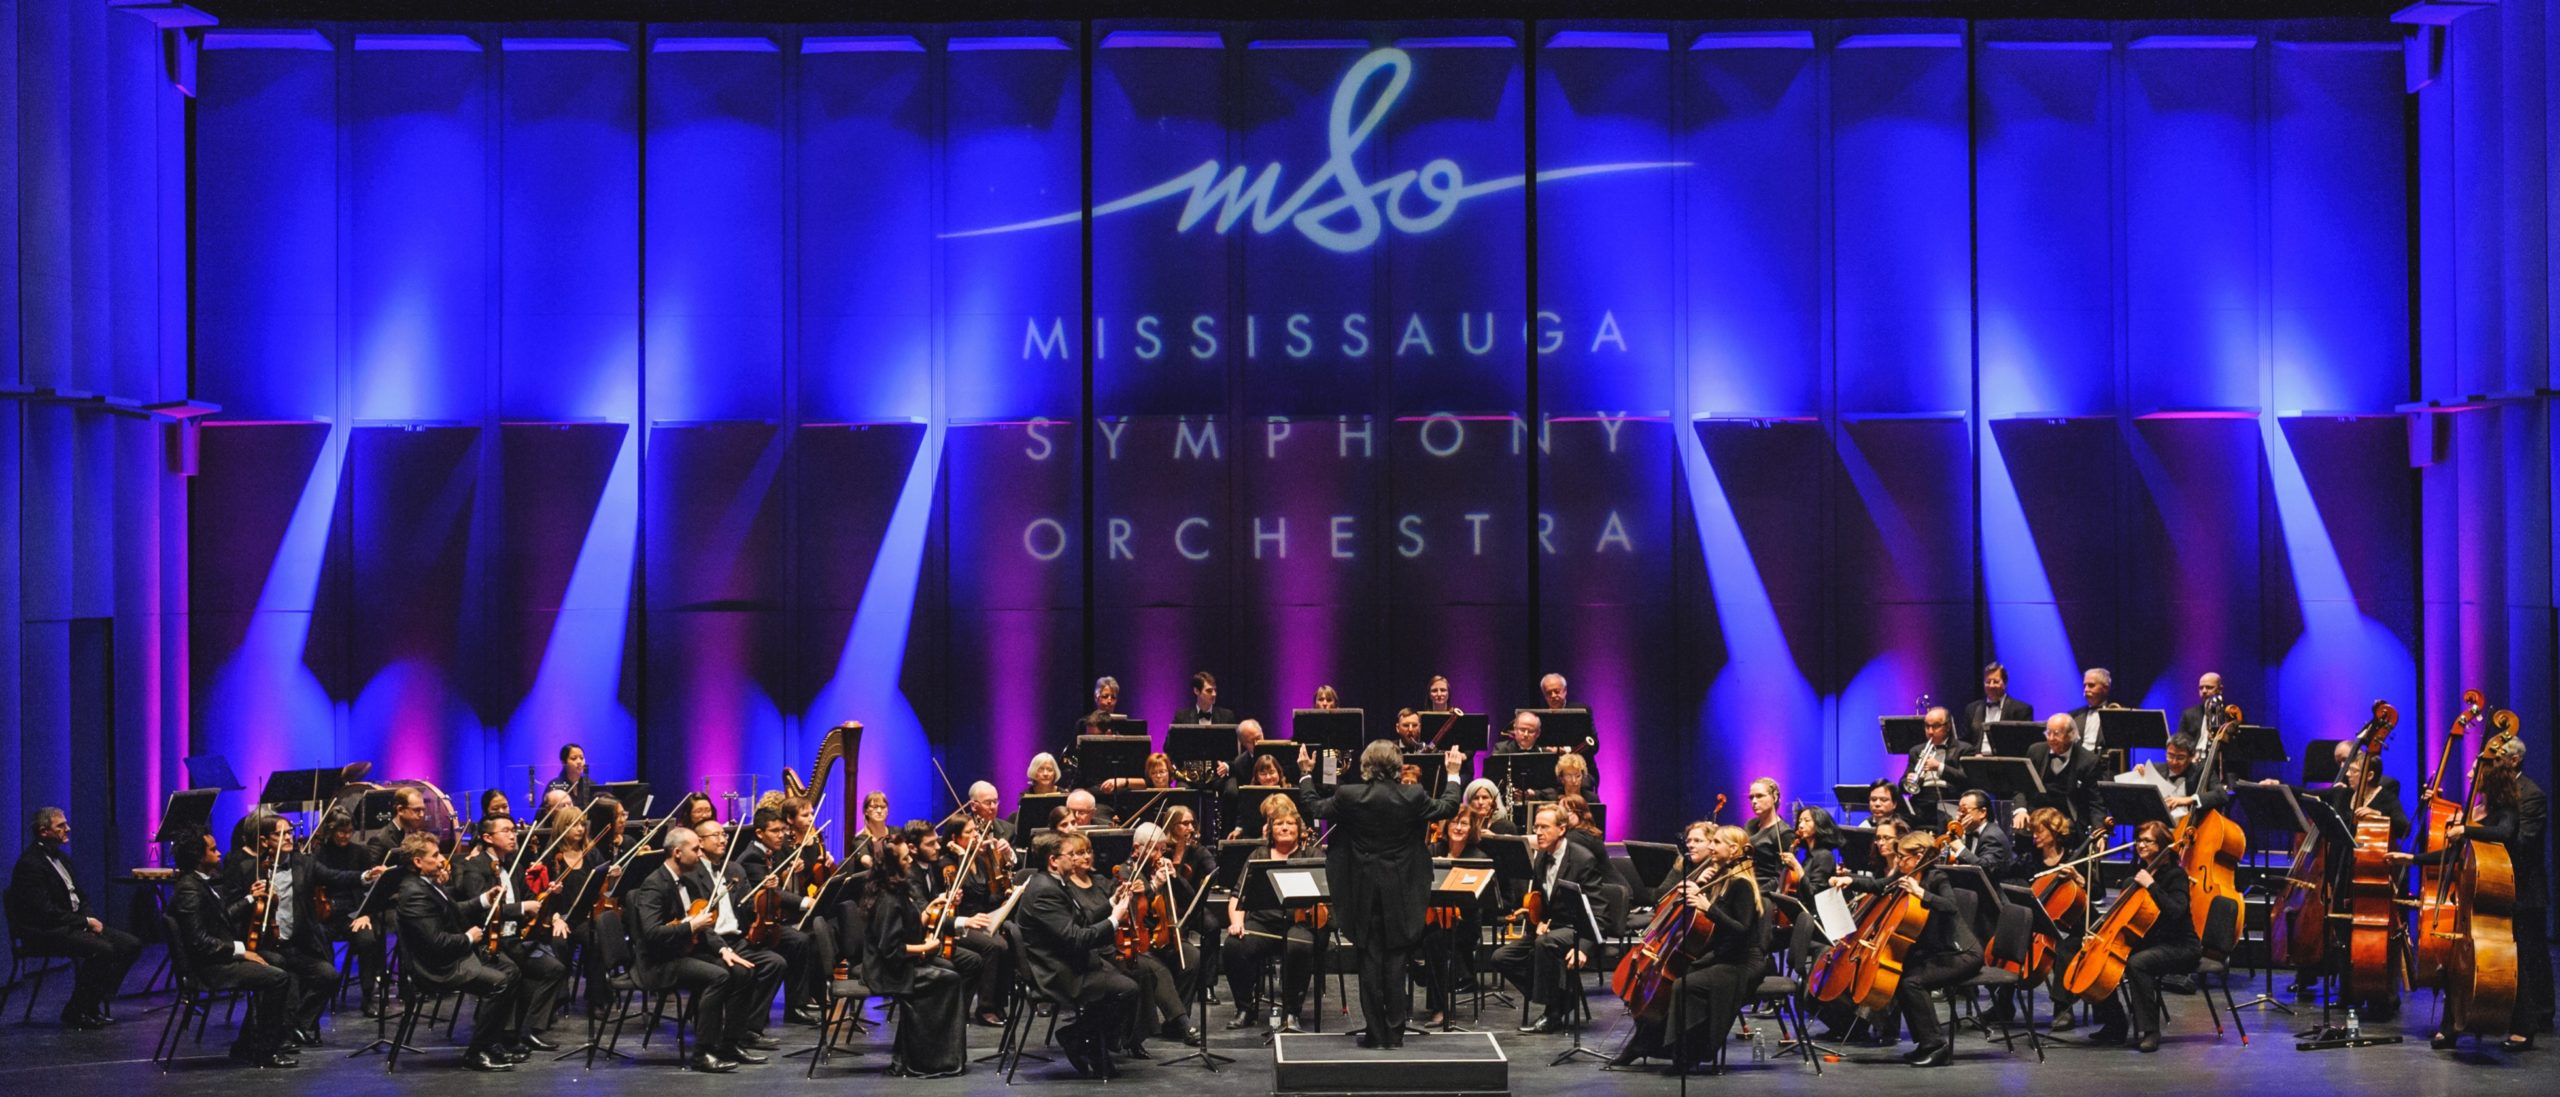 Support the Mississauga Symphony